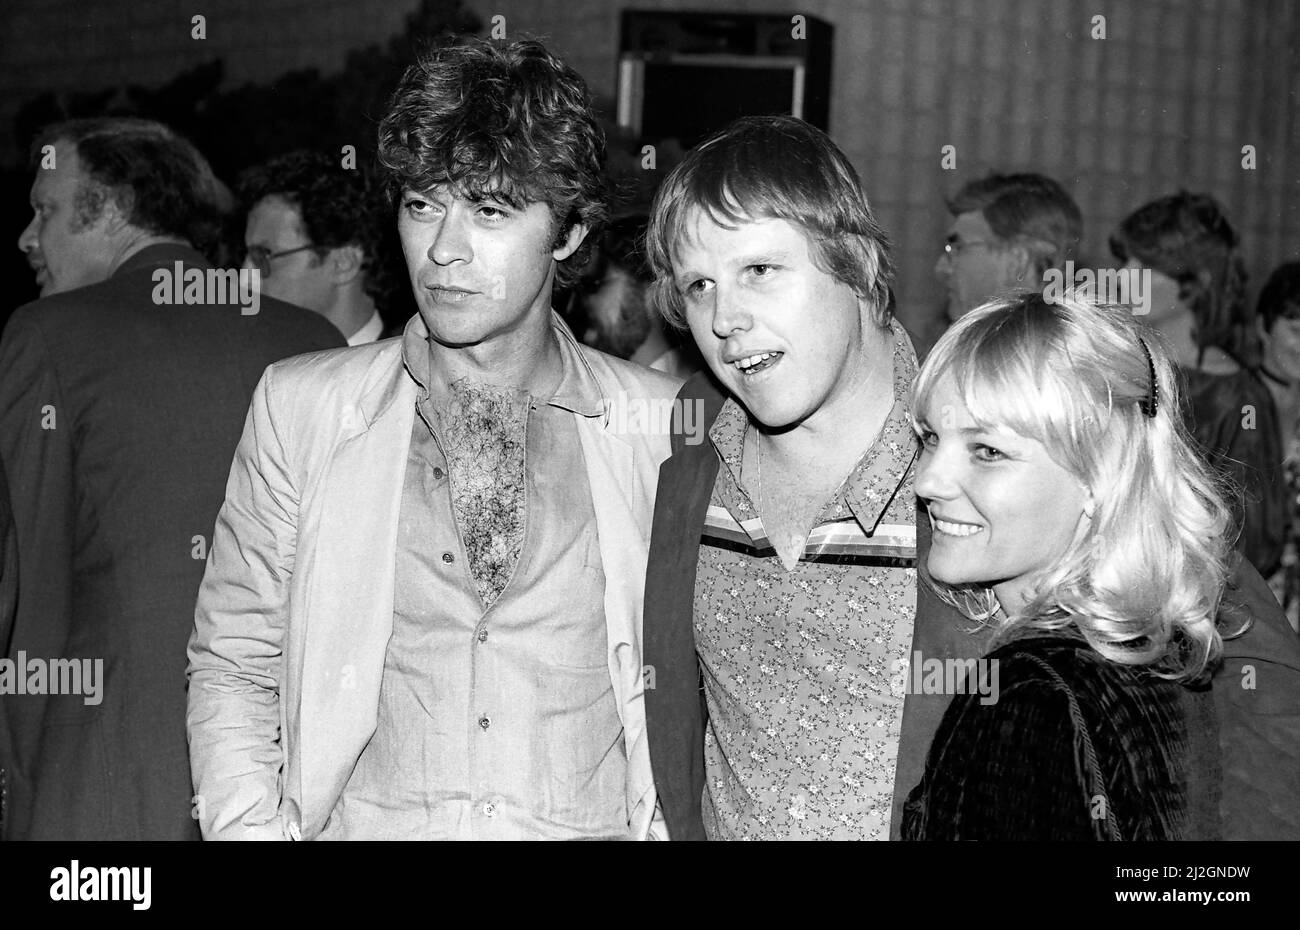 Musician Robbie Robertson of The Band with actor Gary Busey attending the premiere of the movie Kramer Vs, Kramer in Hollywood, 1979 Stock Photo